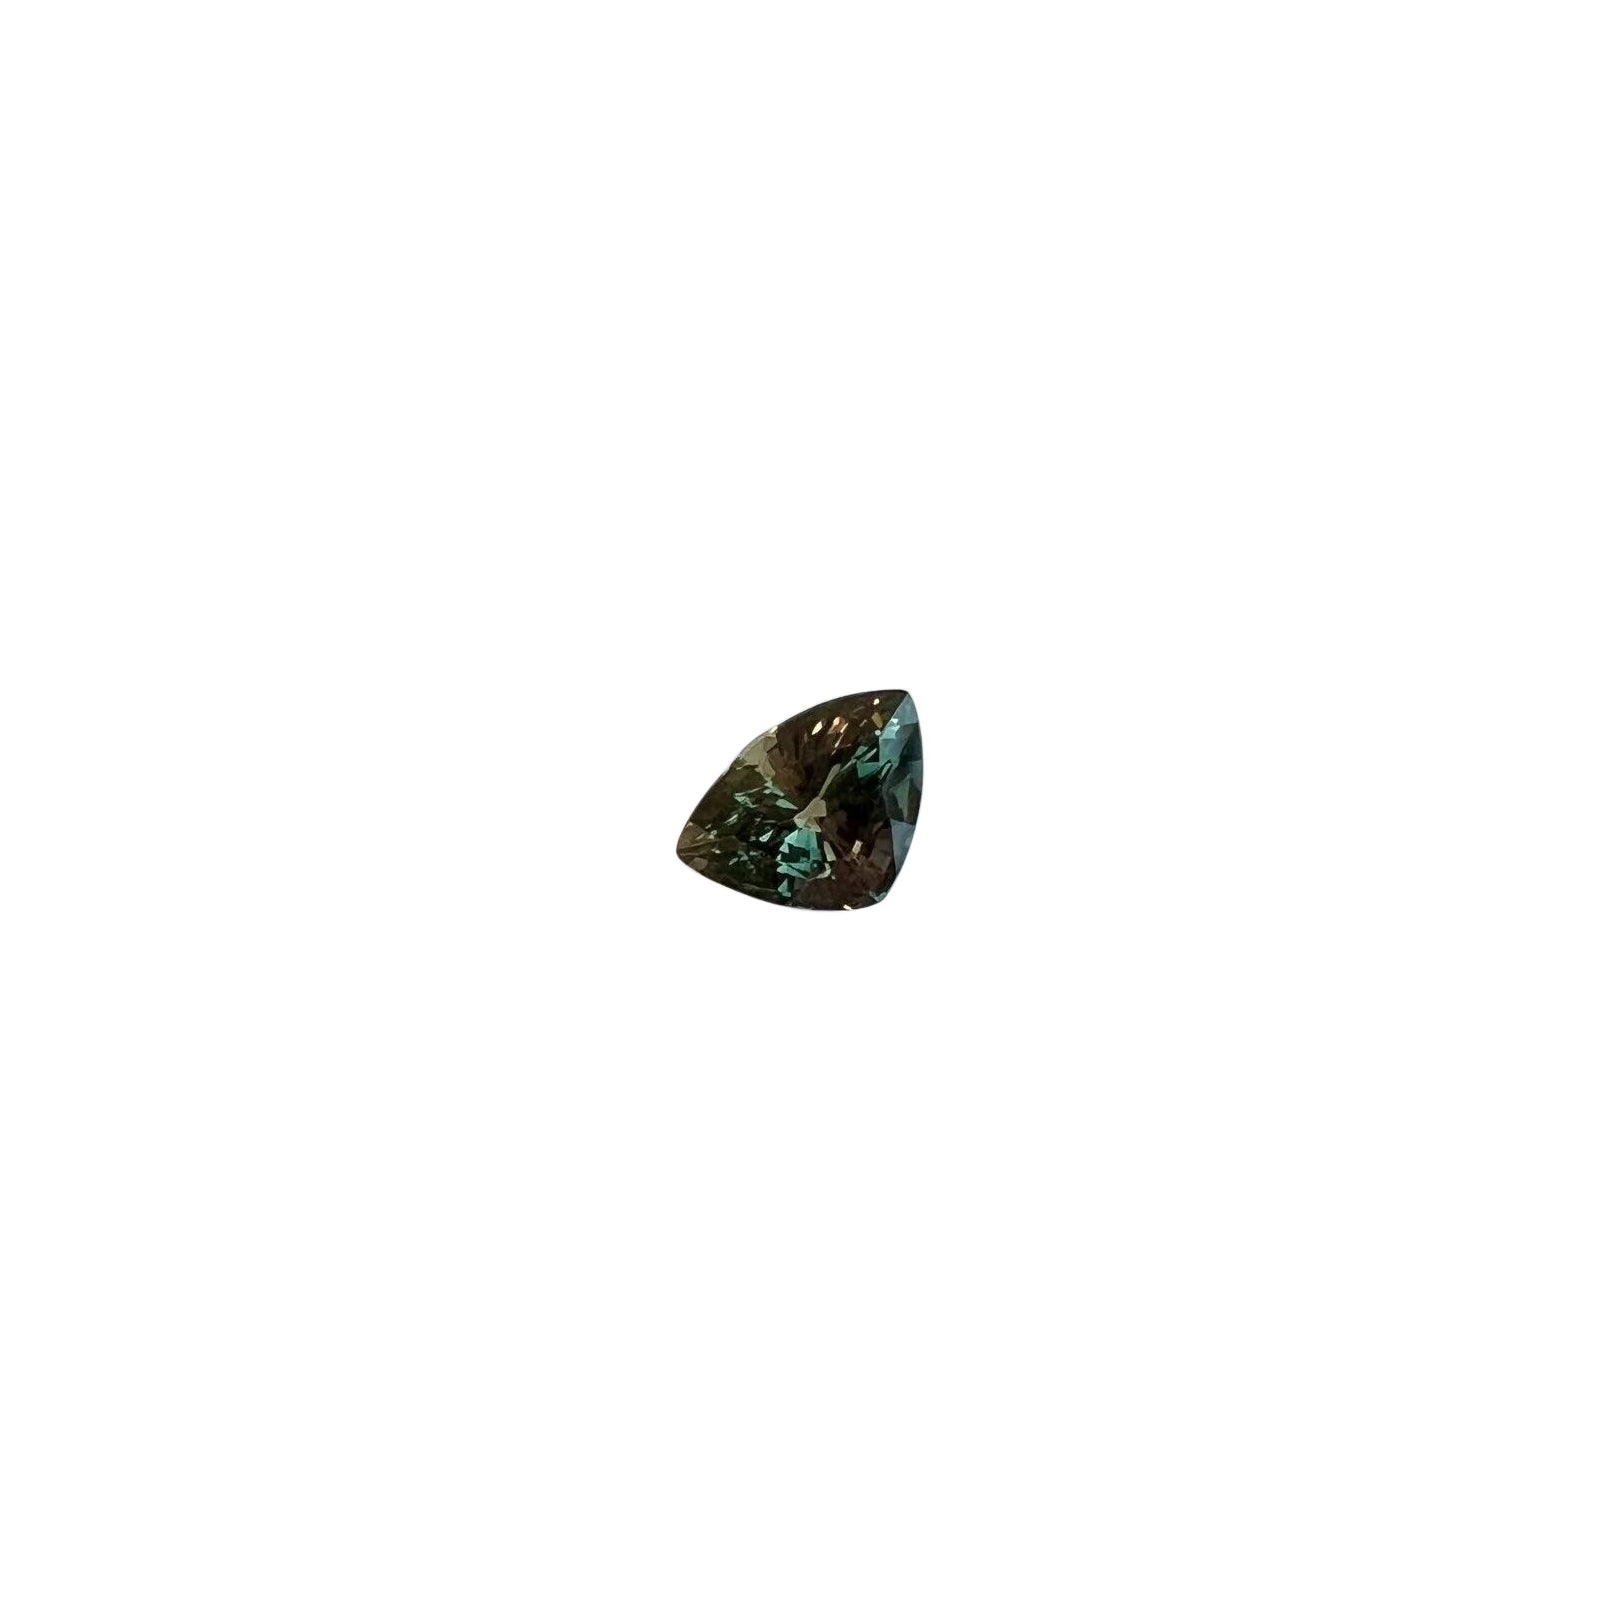 1.01ct Colour Change Sapphire Pink Green Blue No Heat IGI Certified Triangle Cut For Sale